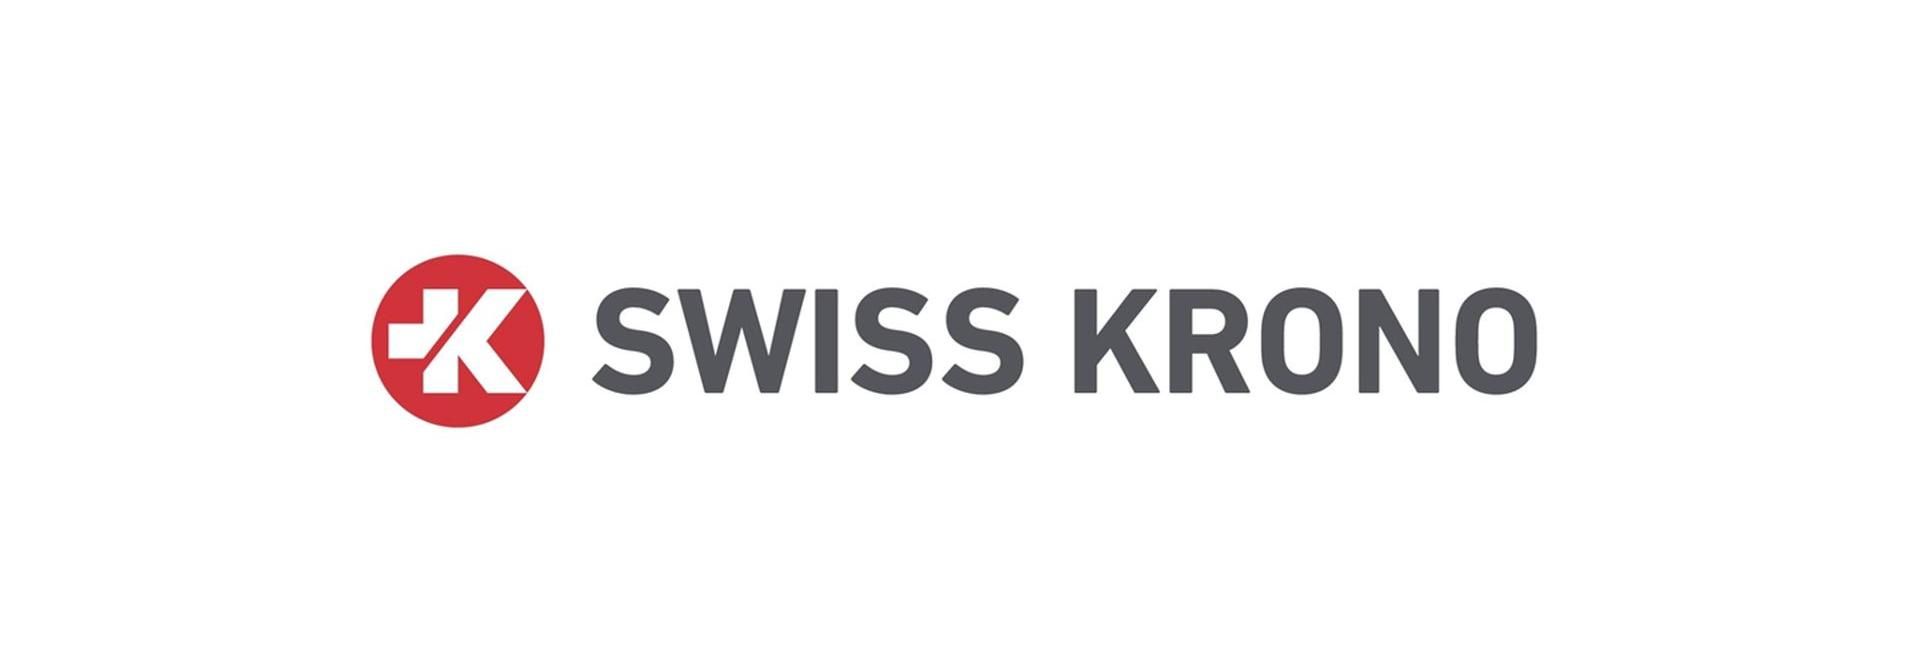 Swiss Krono is launching a capacity increasing investment in Vásárosnamény